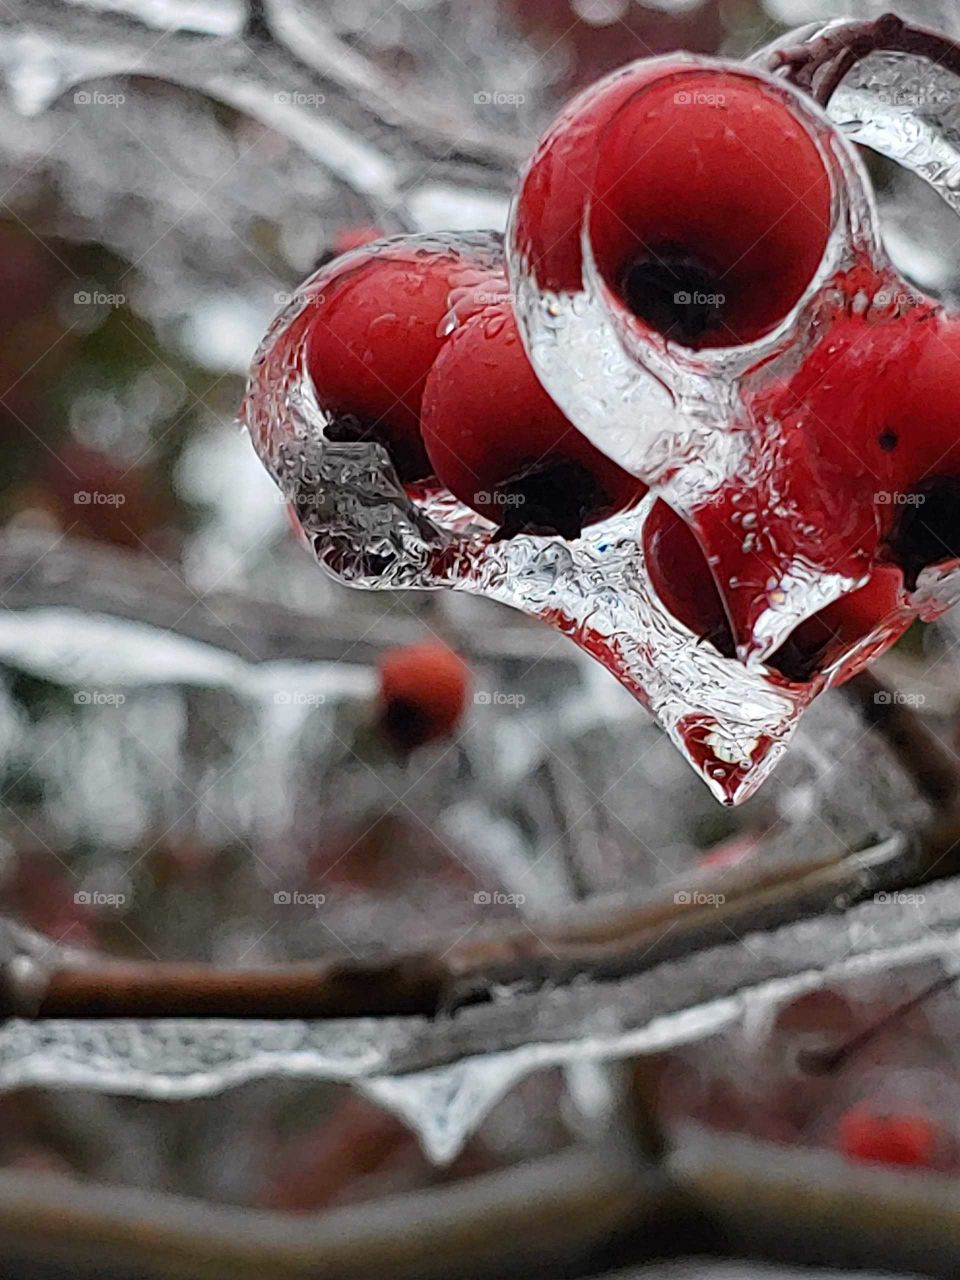 Cold, clear ice hanging desperately onto rich, red berries. It's the last bits of ice, waiting to melt - but it hung on for just a few lingering photos.